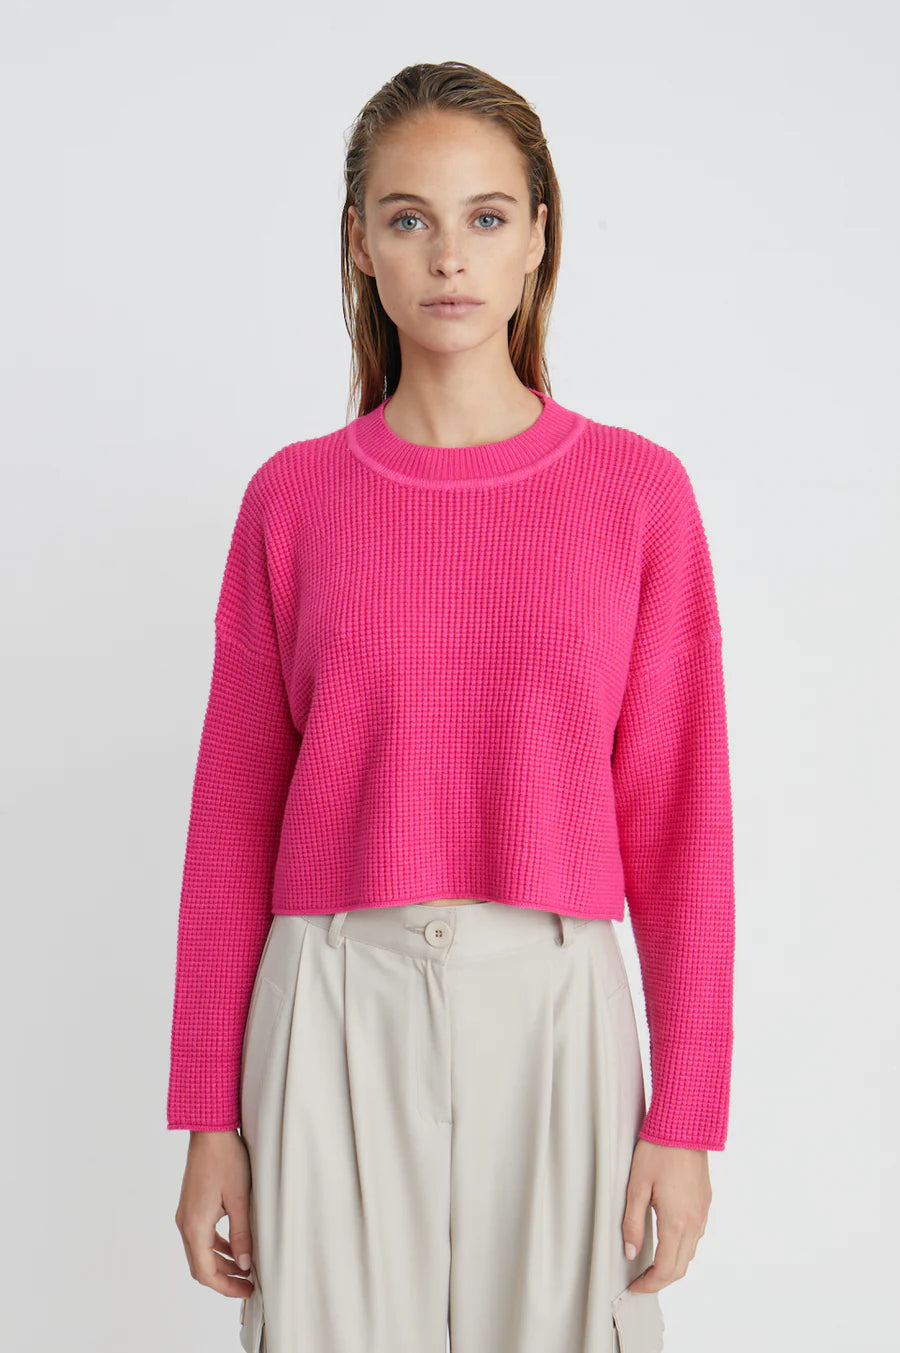 STOOGEES SWEATER/ HOT PINK